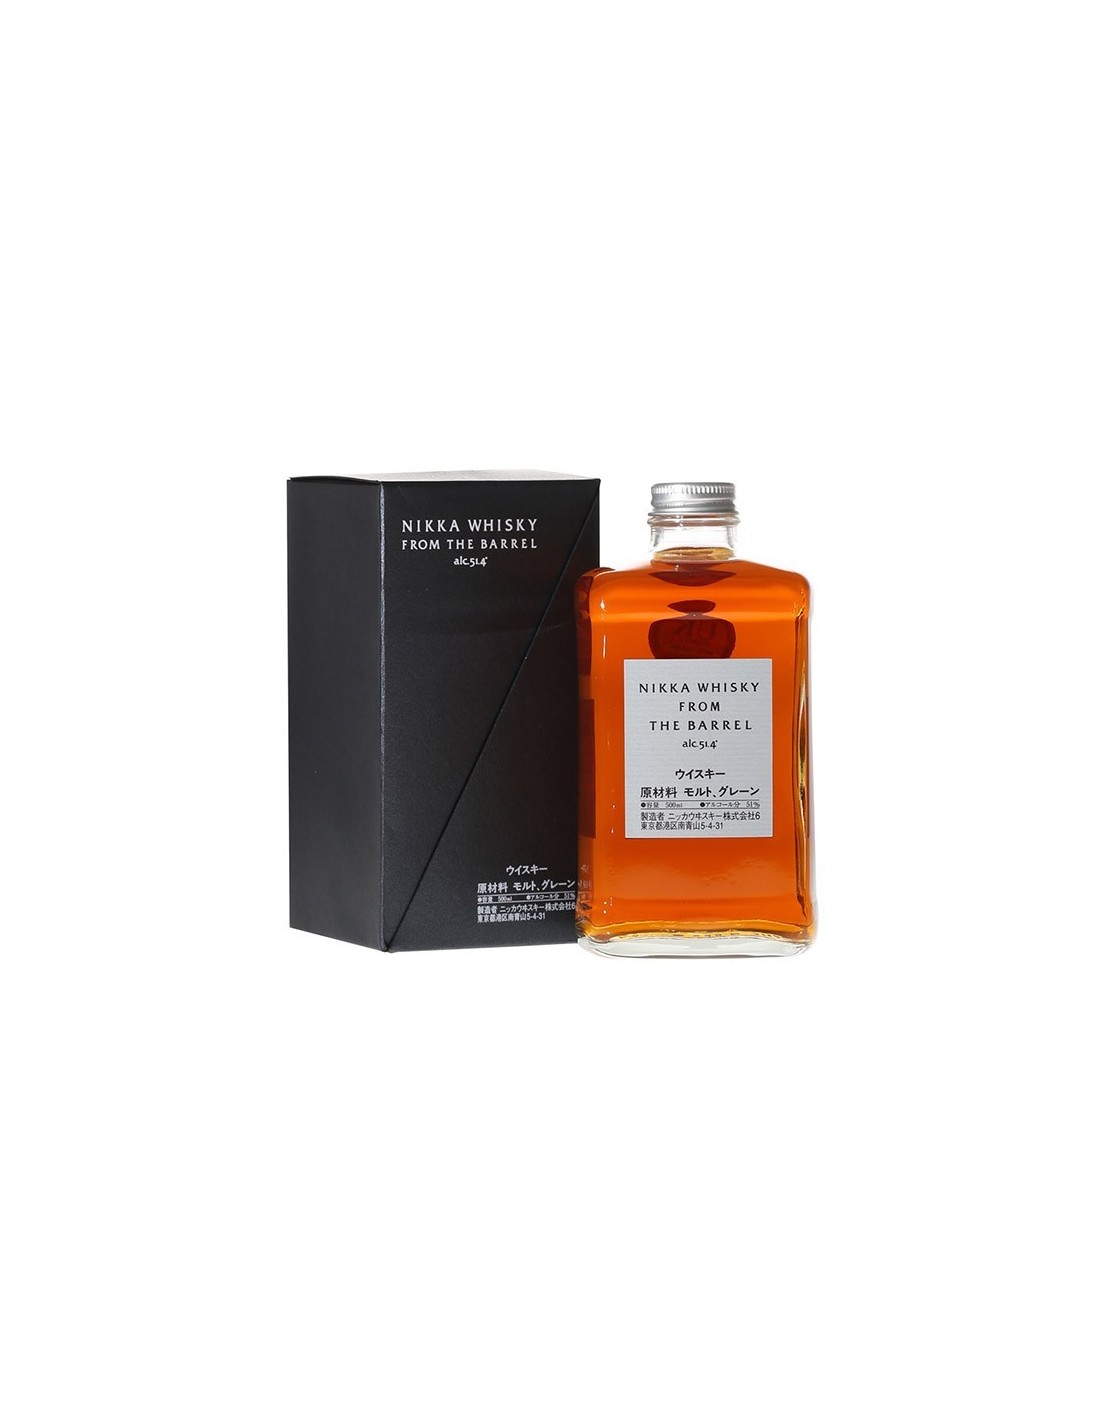 Whisky Nikka From The Barrel, 51.4% alc., 0.5L, Japonia